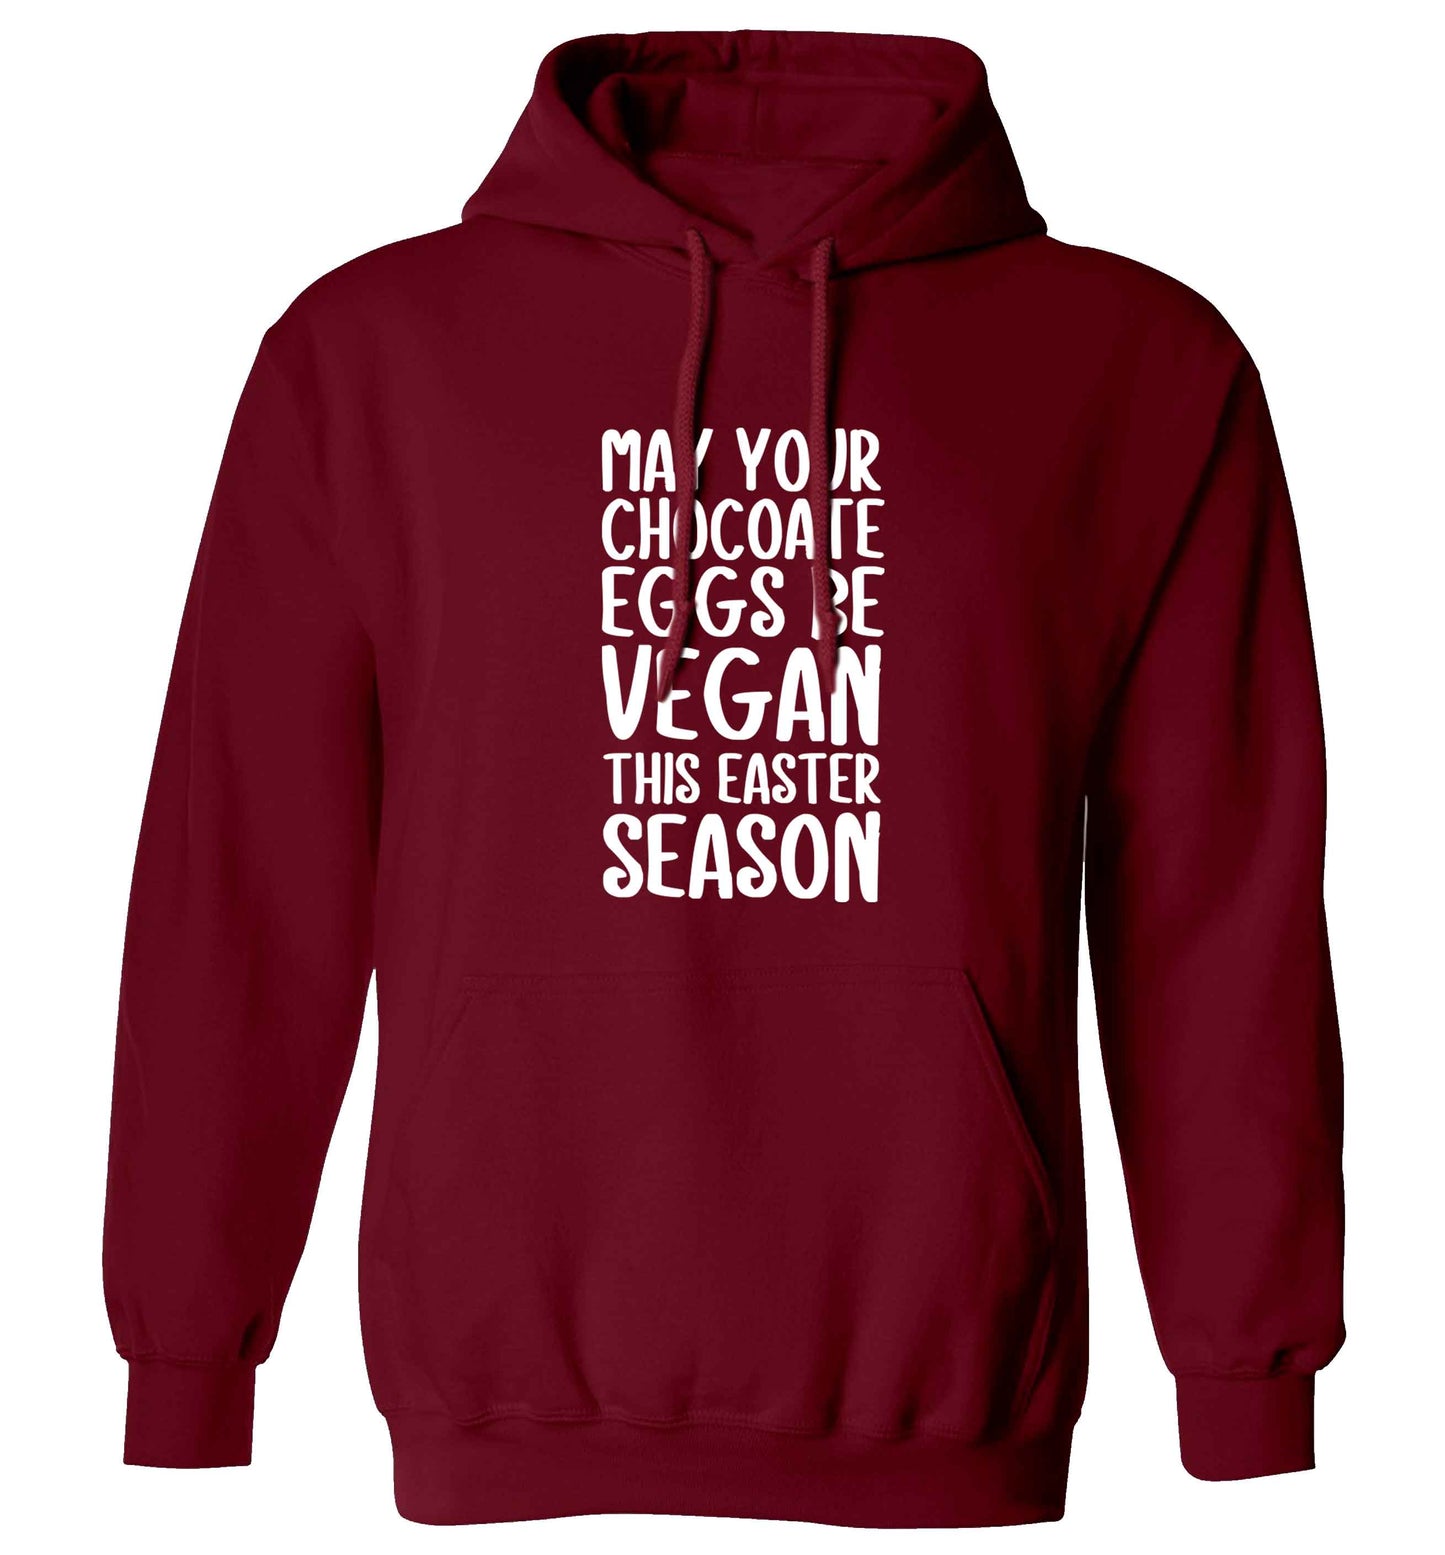 Easter bunny approved! Vegans will love this easter themed adults unisex maroon hoodie 2XL